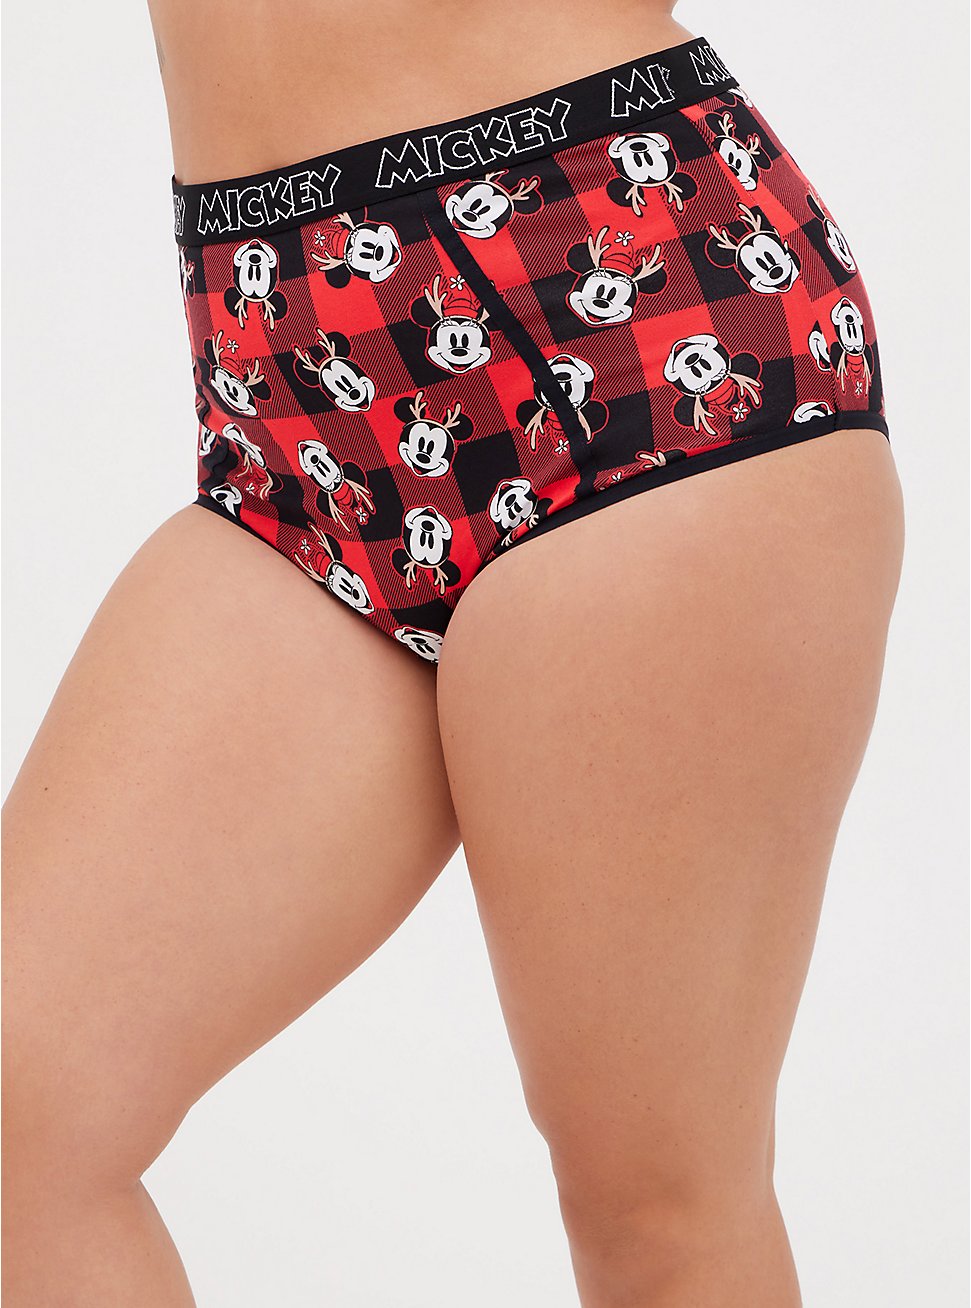 Plus Size Disney High Waist Cheeky Panty - Cotton Mickey Mouse Plaid Red, MULTI, hi-res